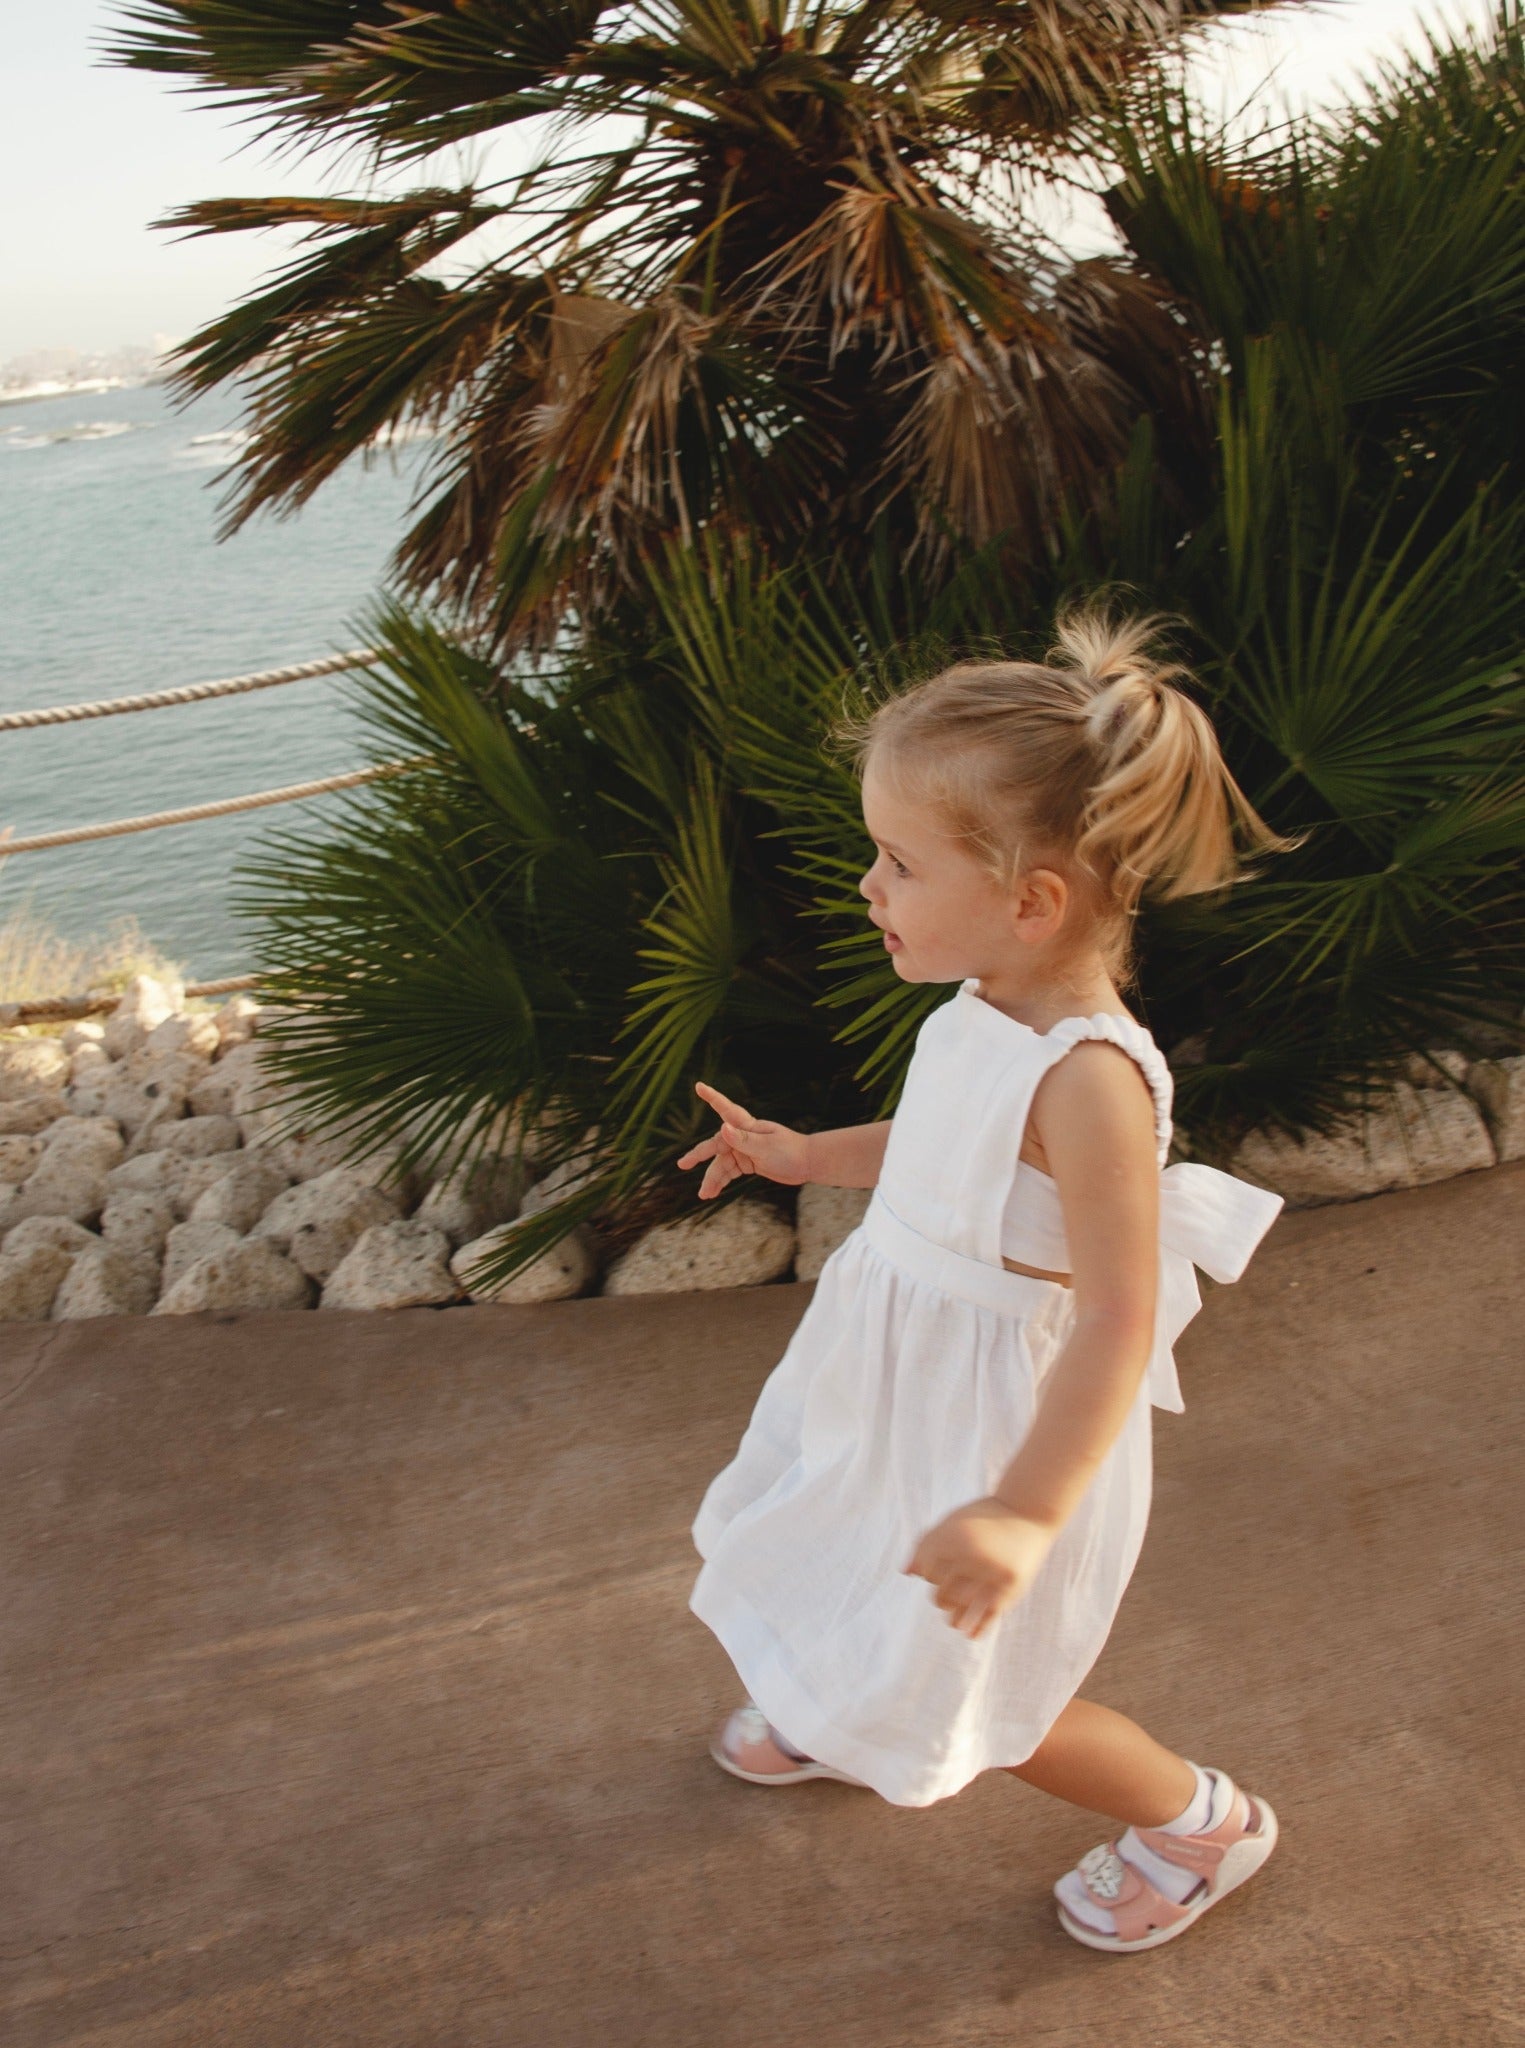 Olivia Linen Dress for Girls Special Edition